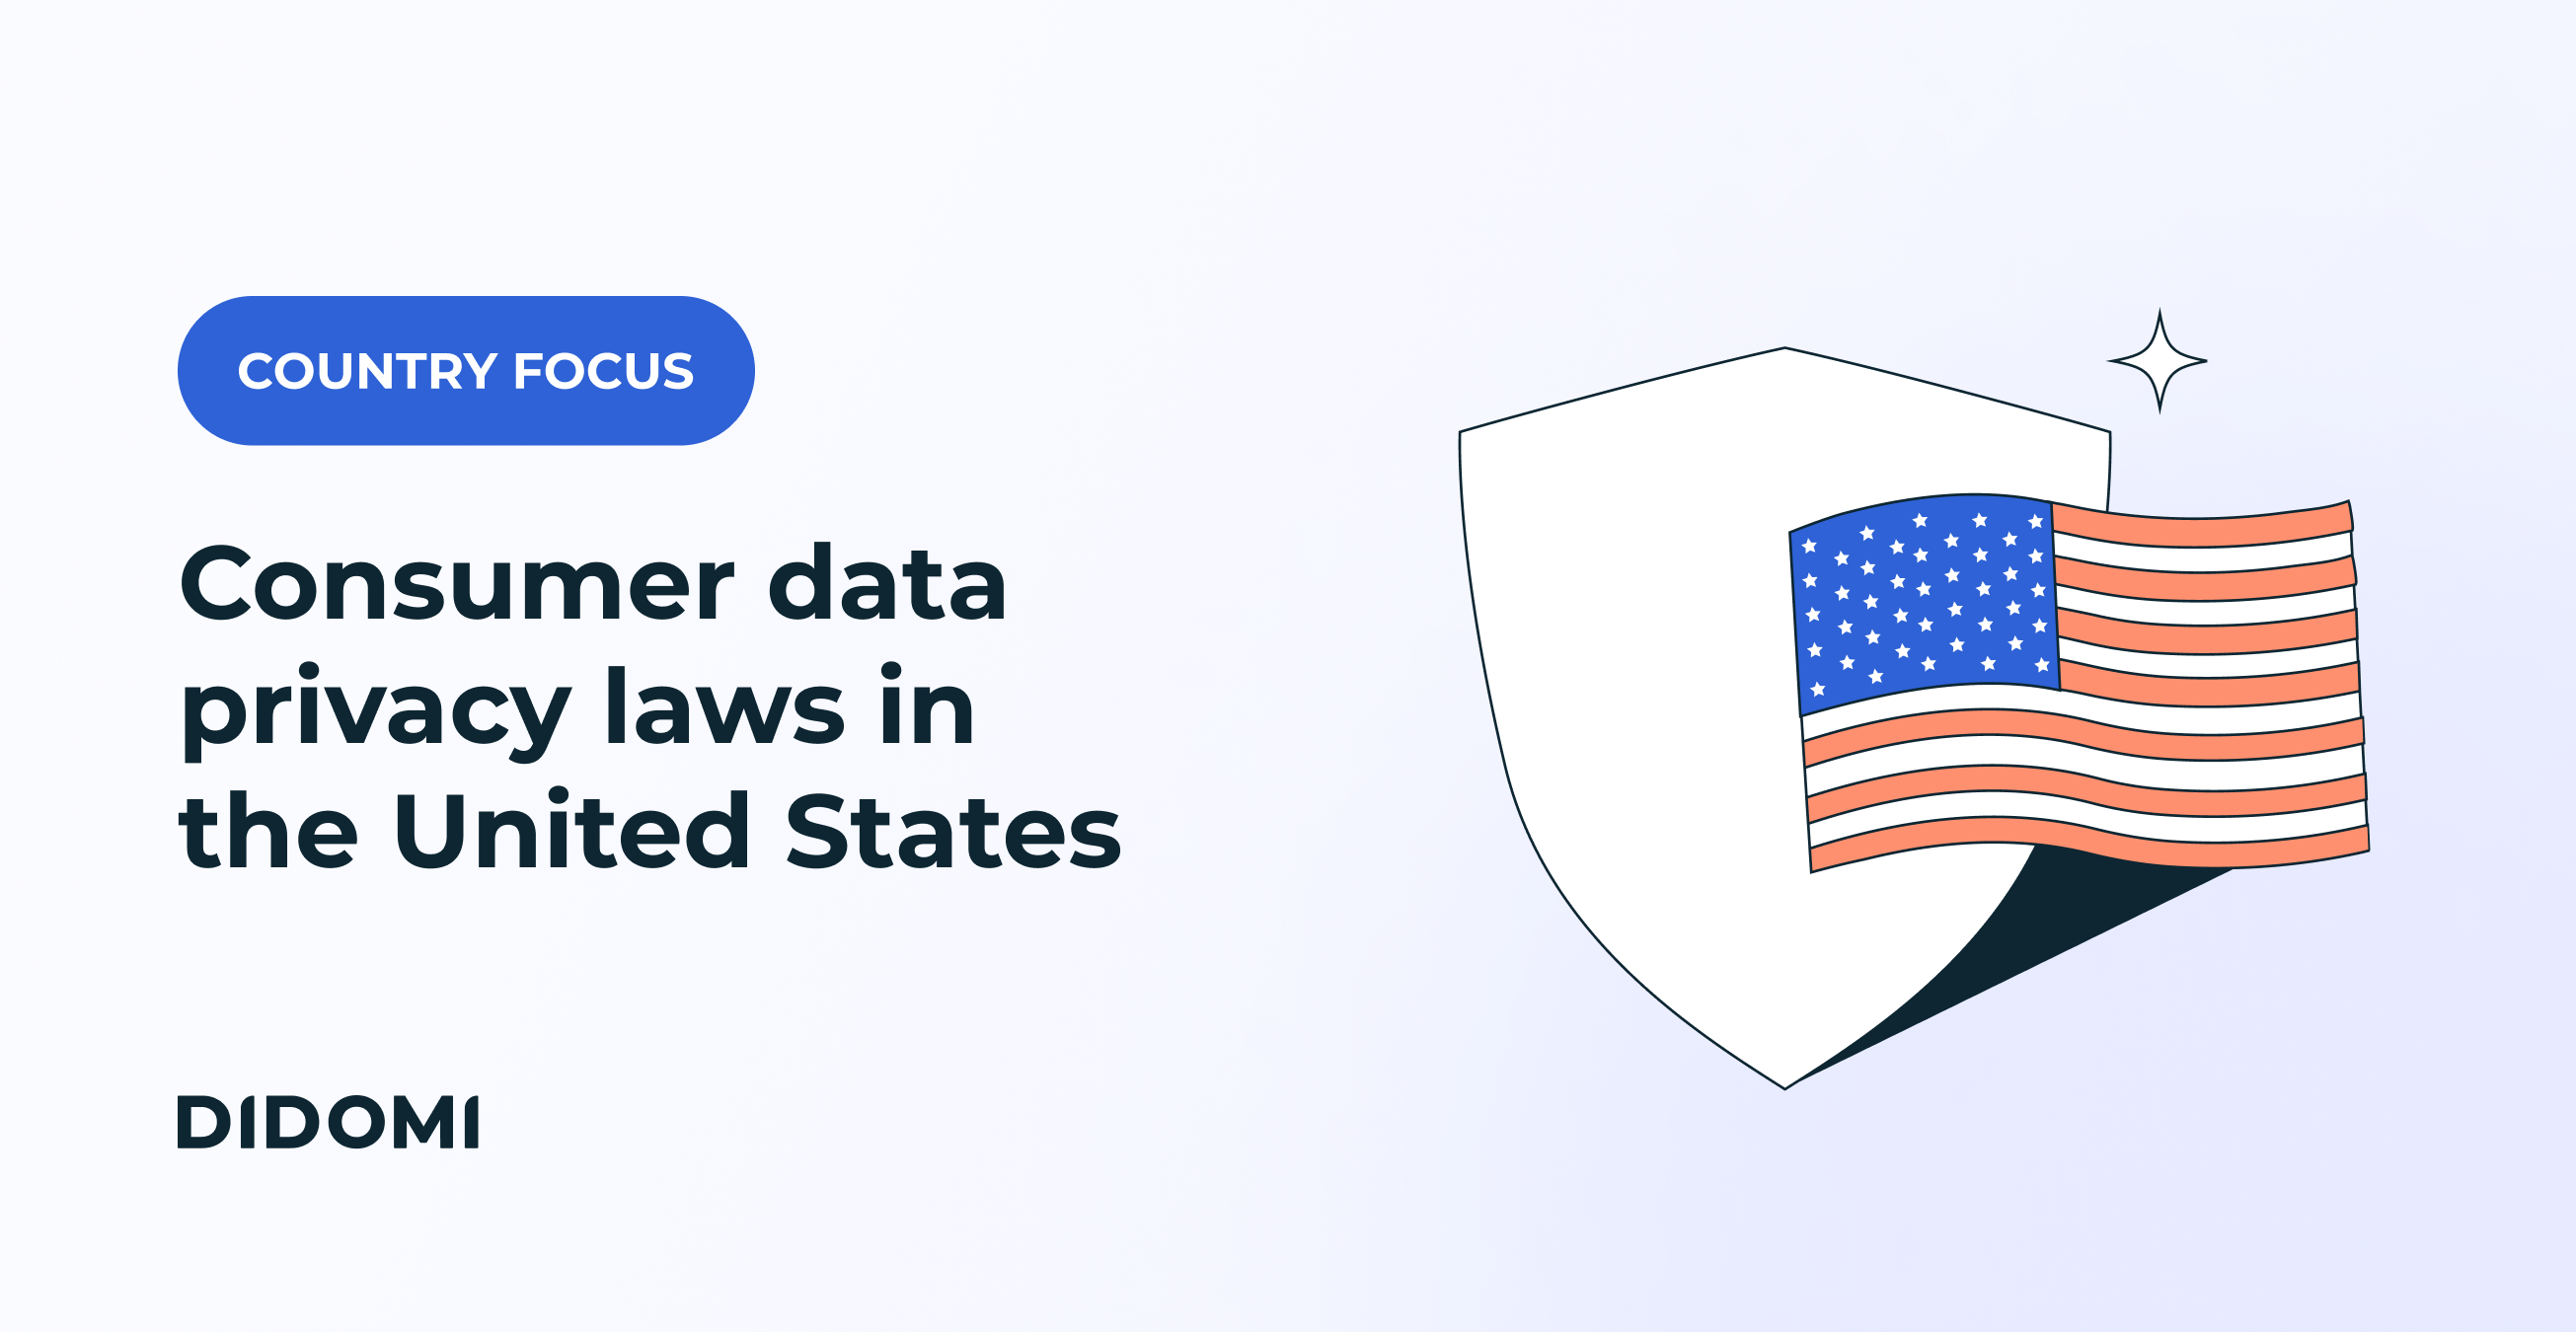 Featured image of a blog post on consumer data privacy laws in the United States, along with a flag of the USA and the label "Country Focus"